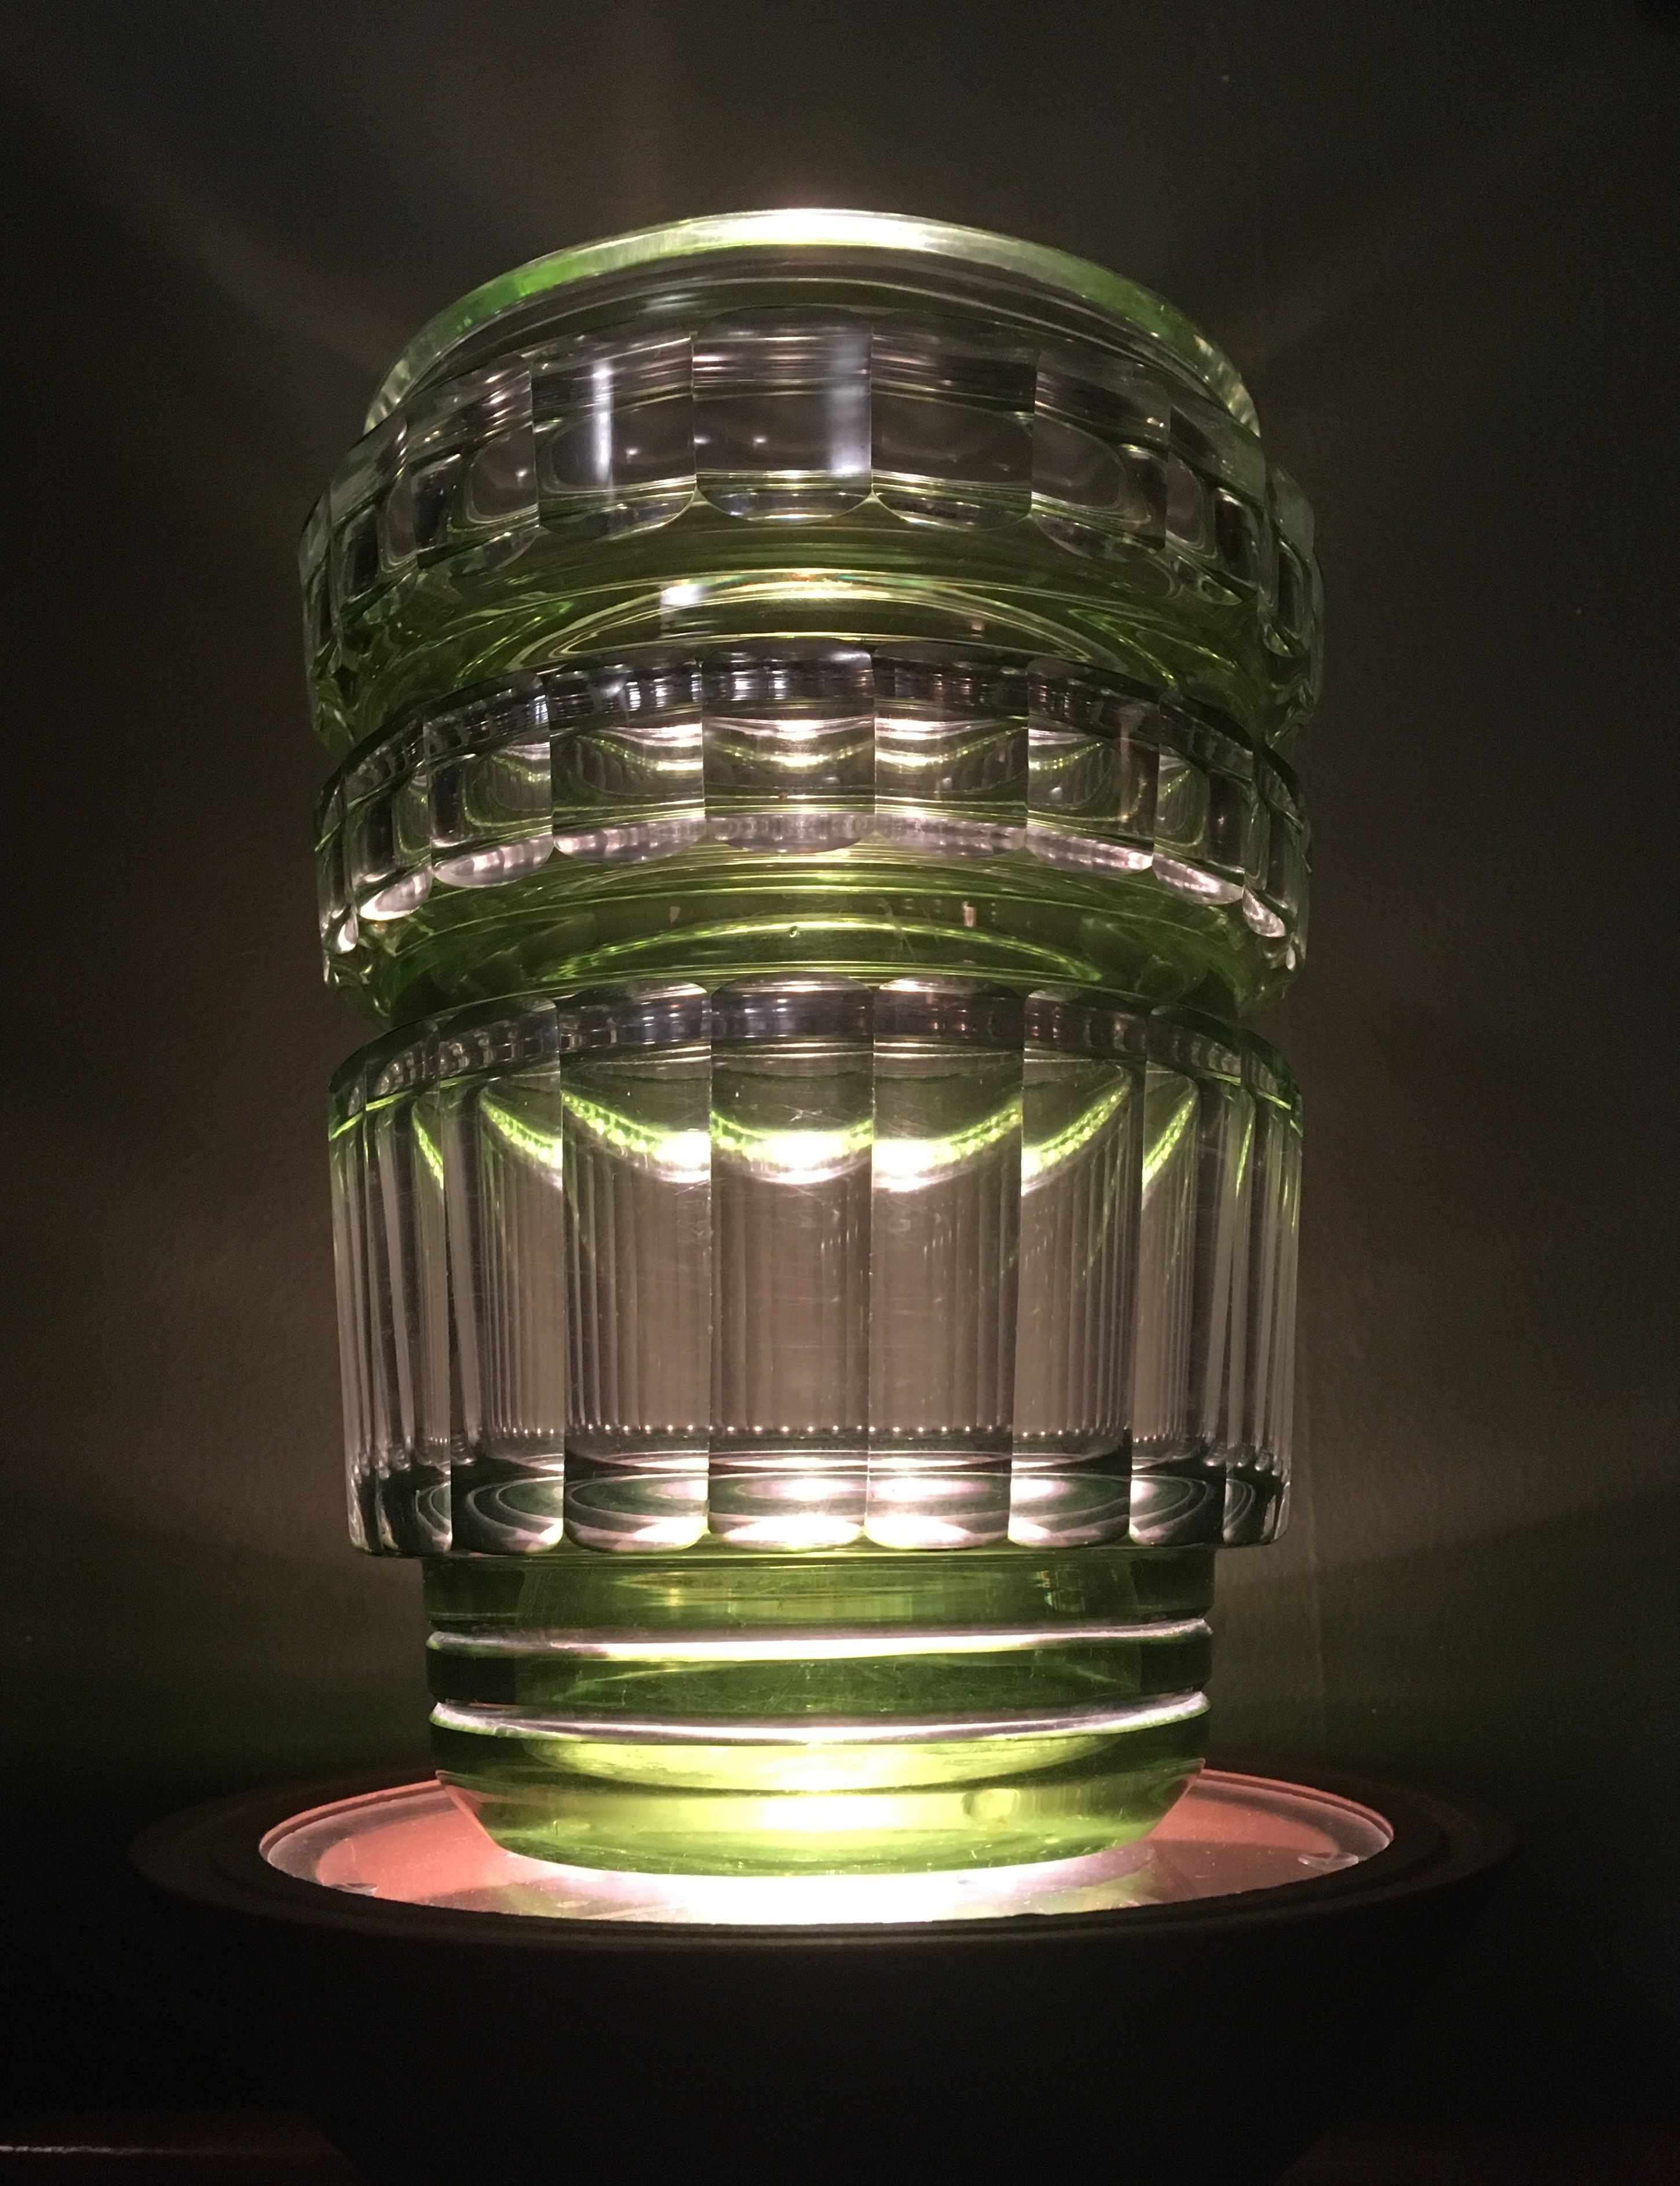 24 Fabulous 5 Inch Glass Cylinder Vase 2024 free download 5 inch glass cylinder vase of 21 crystal glass vase the weekly world with regard to val saint lambert chinese green crystal vase model formose charles